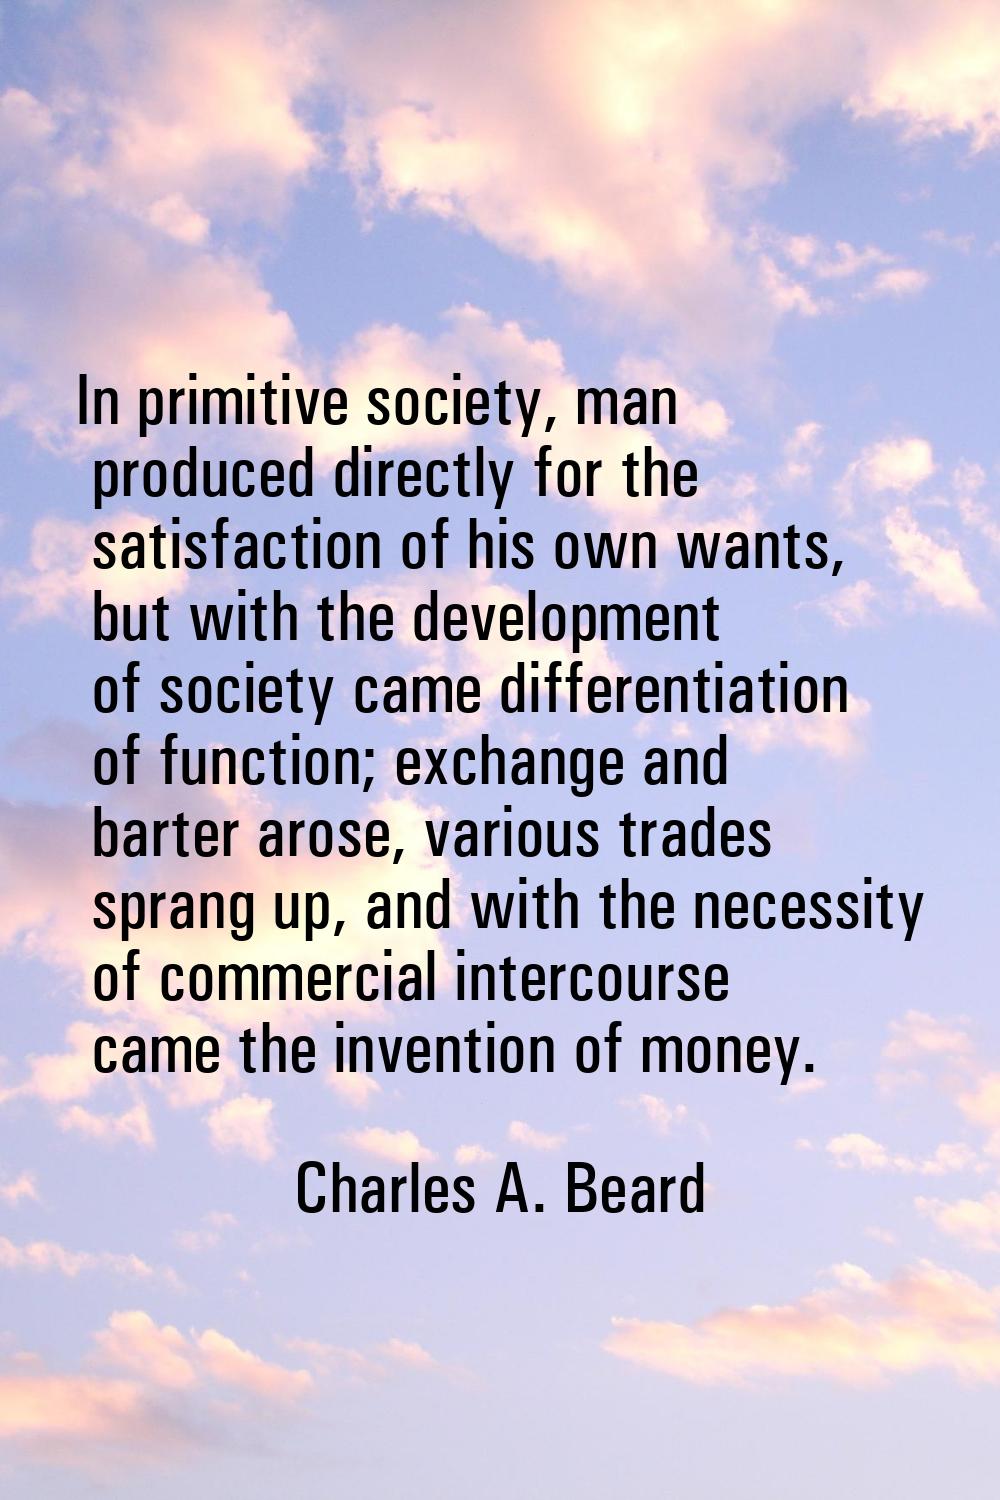 In primitive society, man produced directly for the satisfaction of his own wants, but with the dev